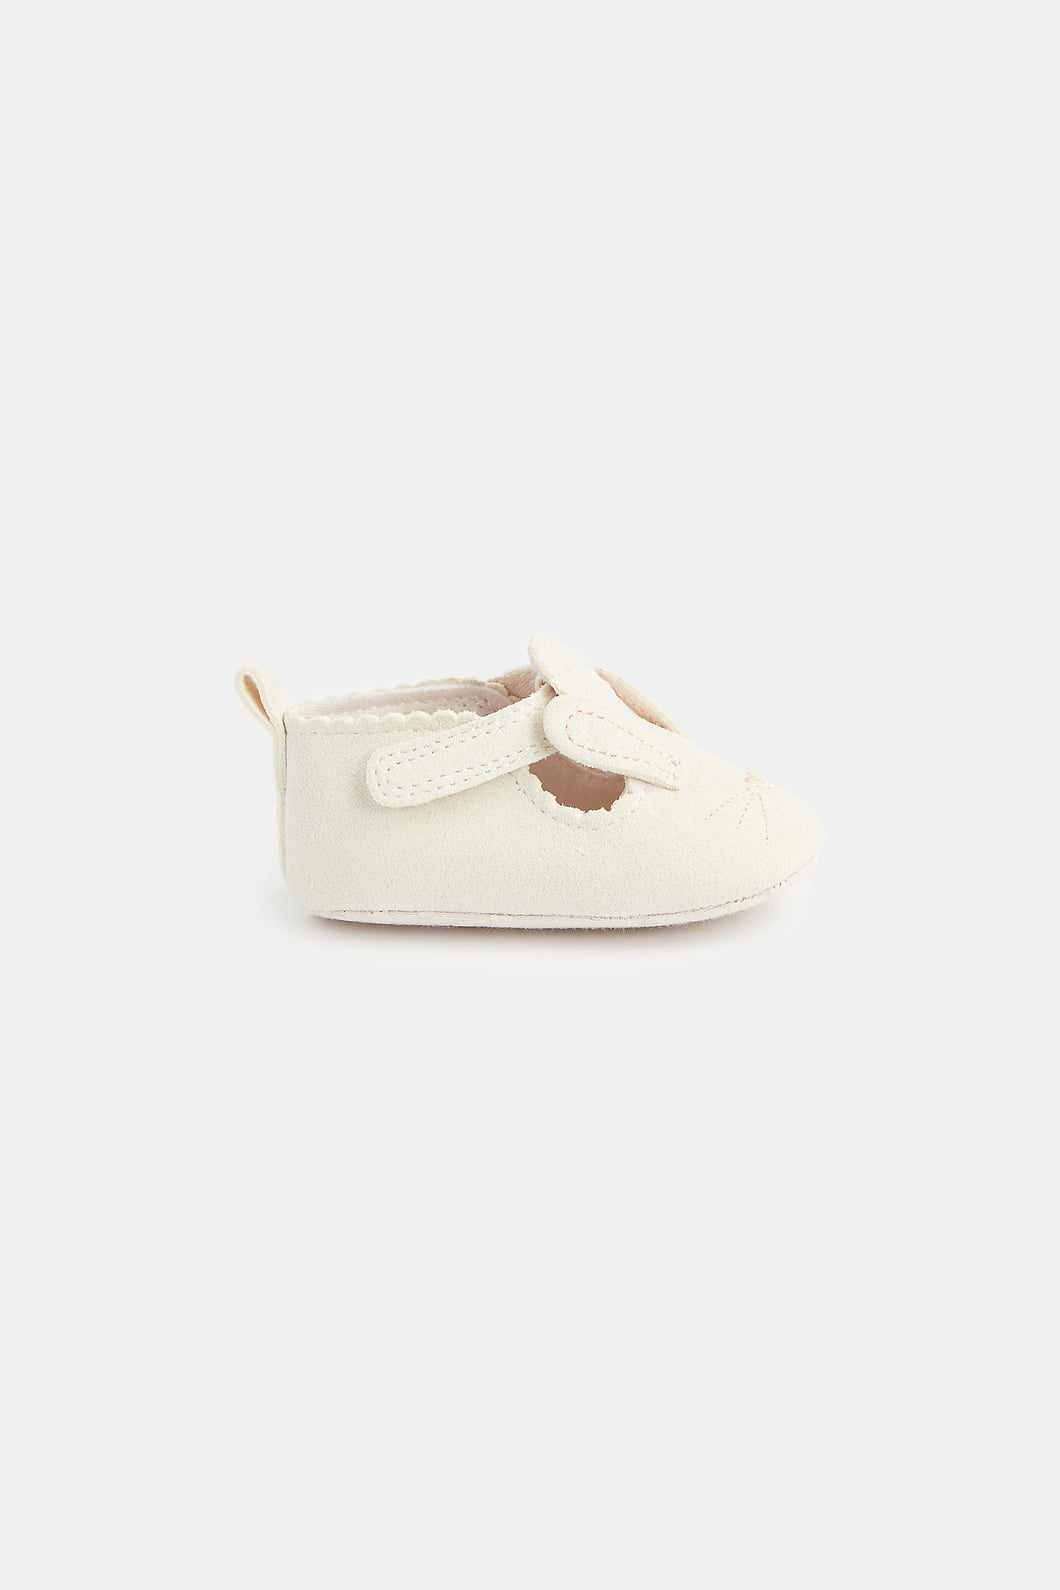 Mothercare White Leather Pram Shoes